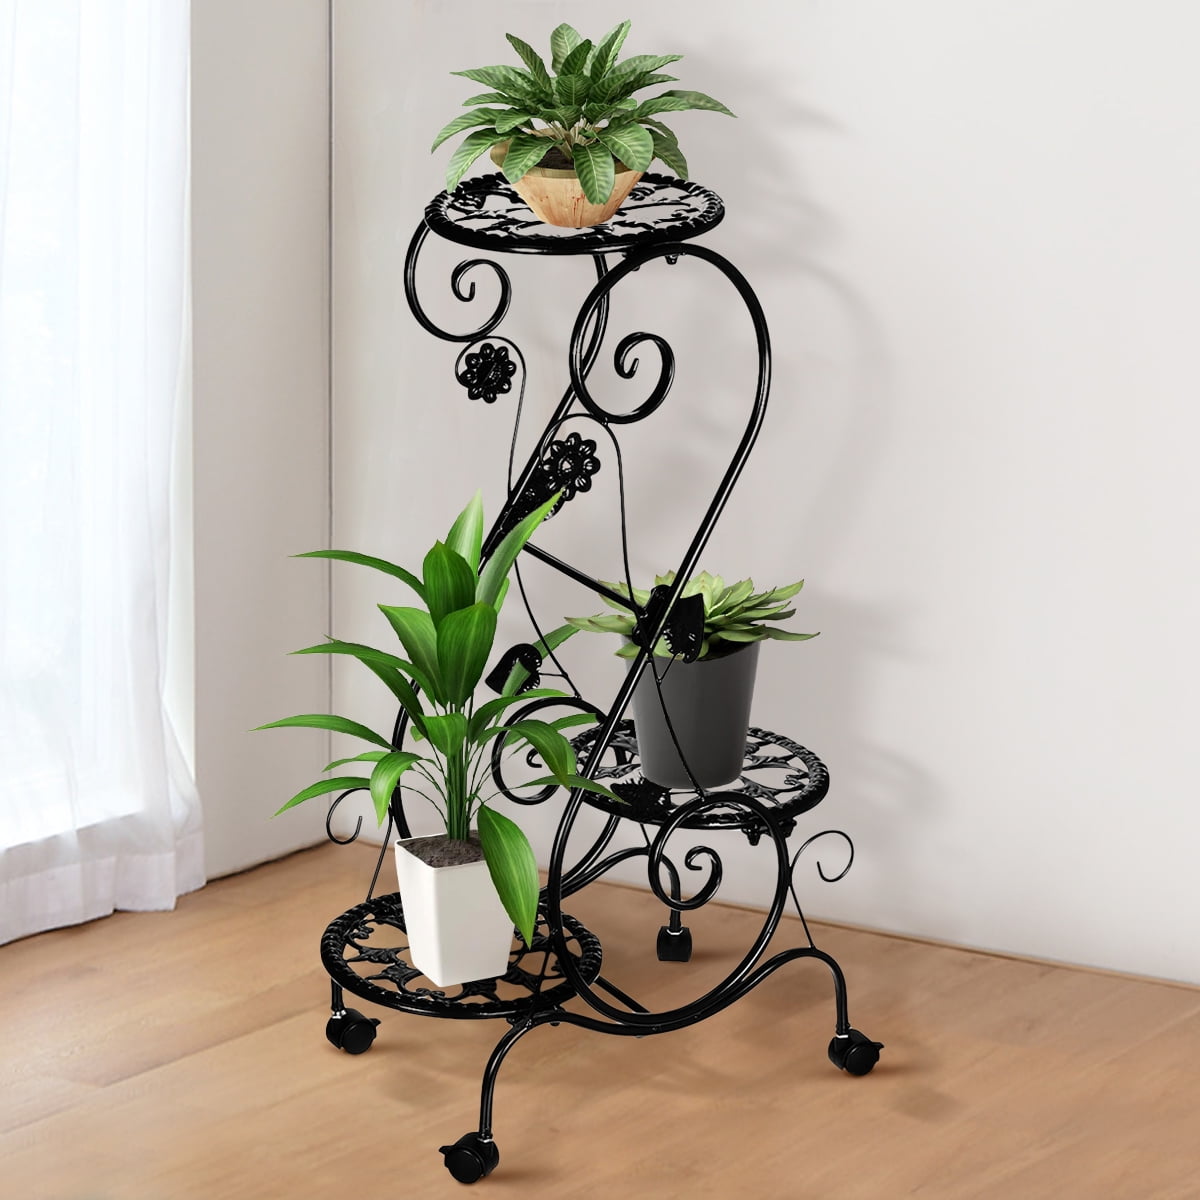 3 Tier Metal Plant Stand Shelf with Movable Wheels Flower Rack Display ...